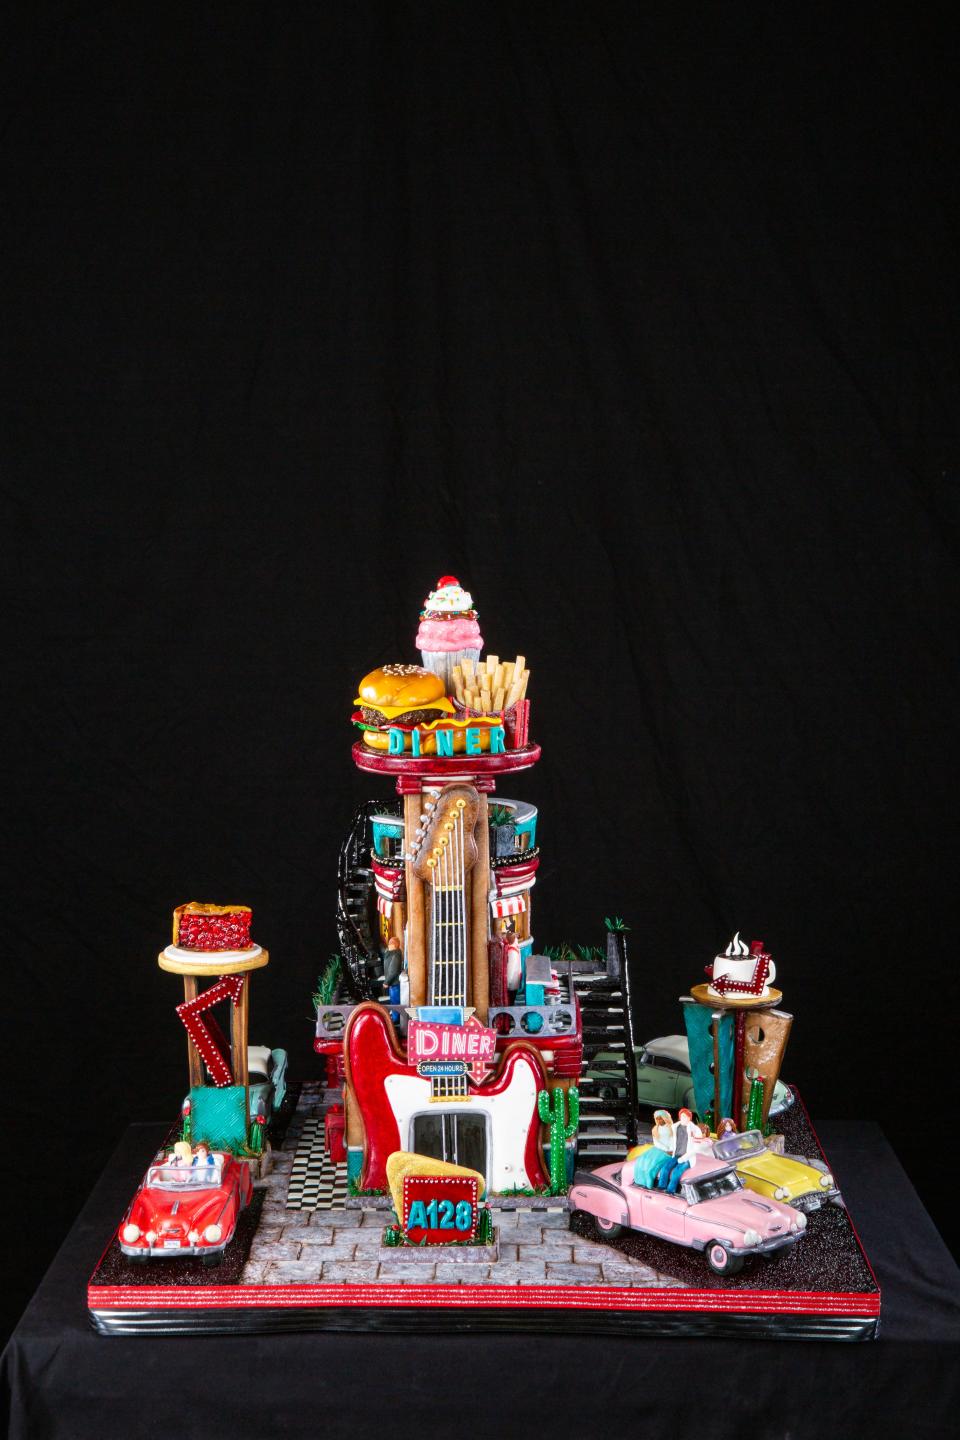 The 31st National Gingerbread House Competition People's Choice: Best in Show Award was presented to the team Love at Frost Sight, of Woodbury, Minnesota, for their creation, “Rockin’ at the Diner."